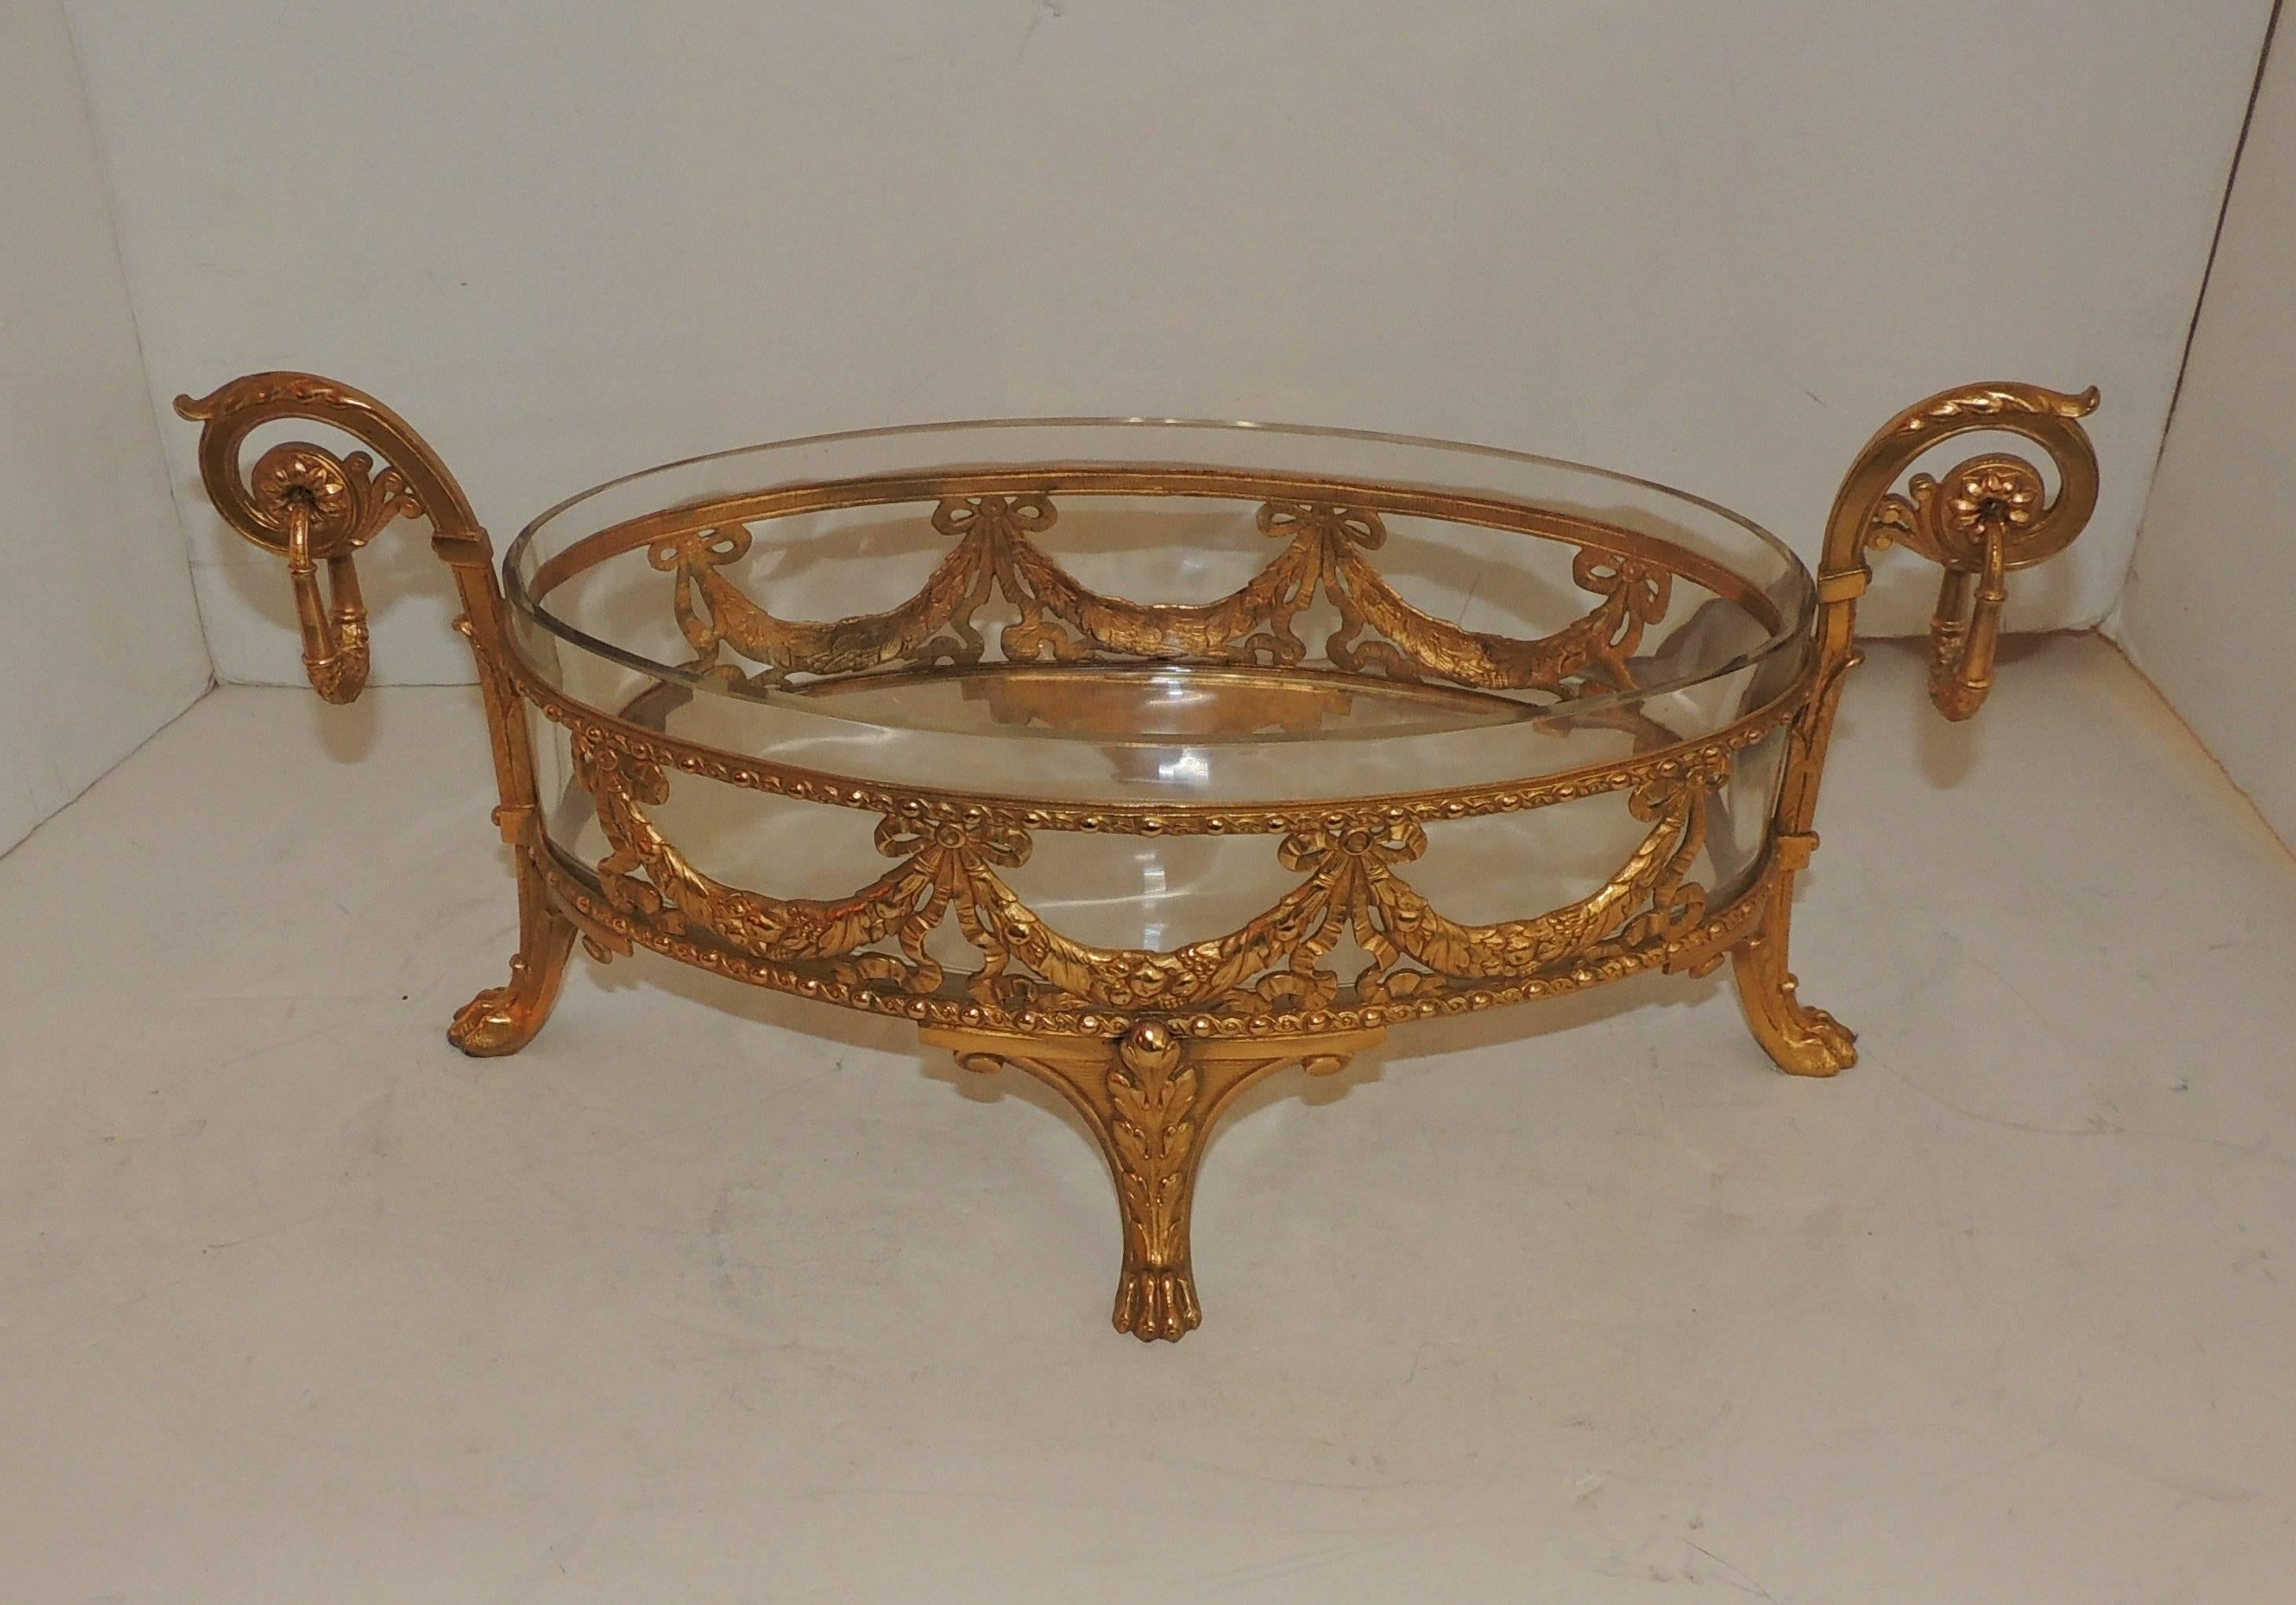 Belle Époque Dore Bronze Crystal Oval Bowl Centerpiece Ormolu Bows Filigree Swag Paw Feet For Sale